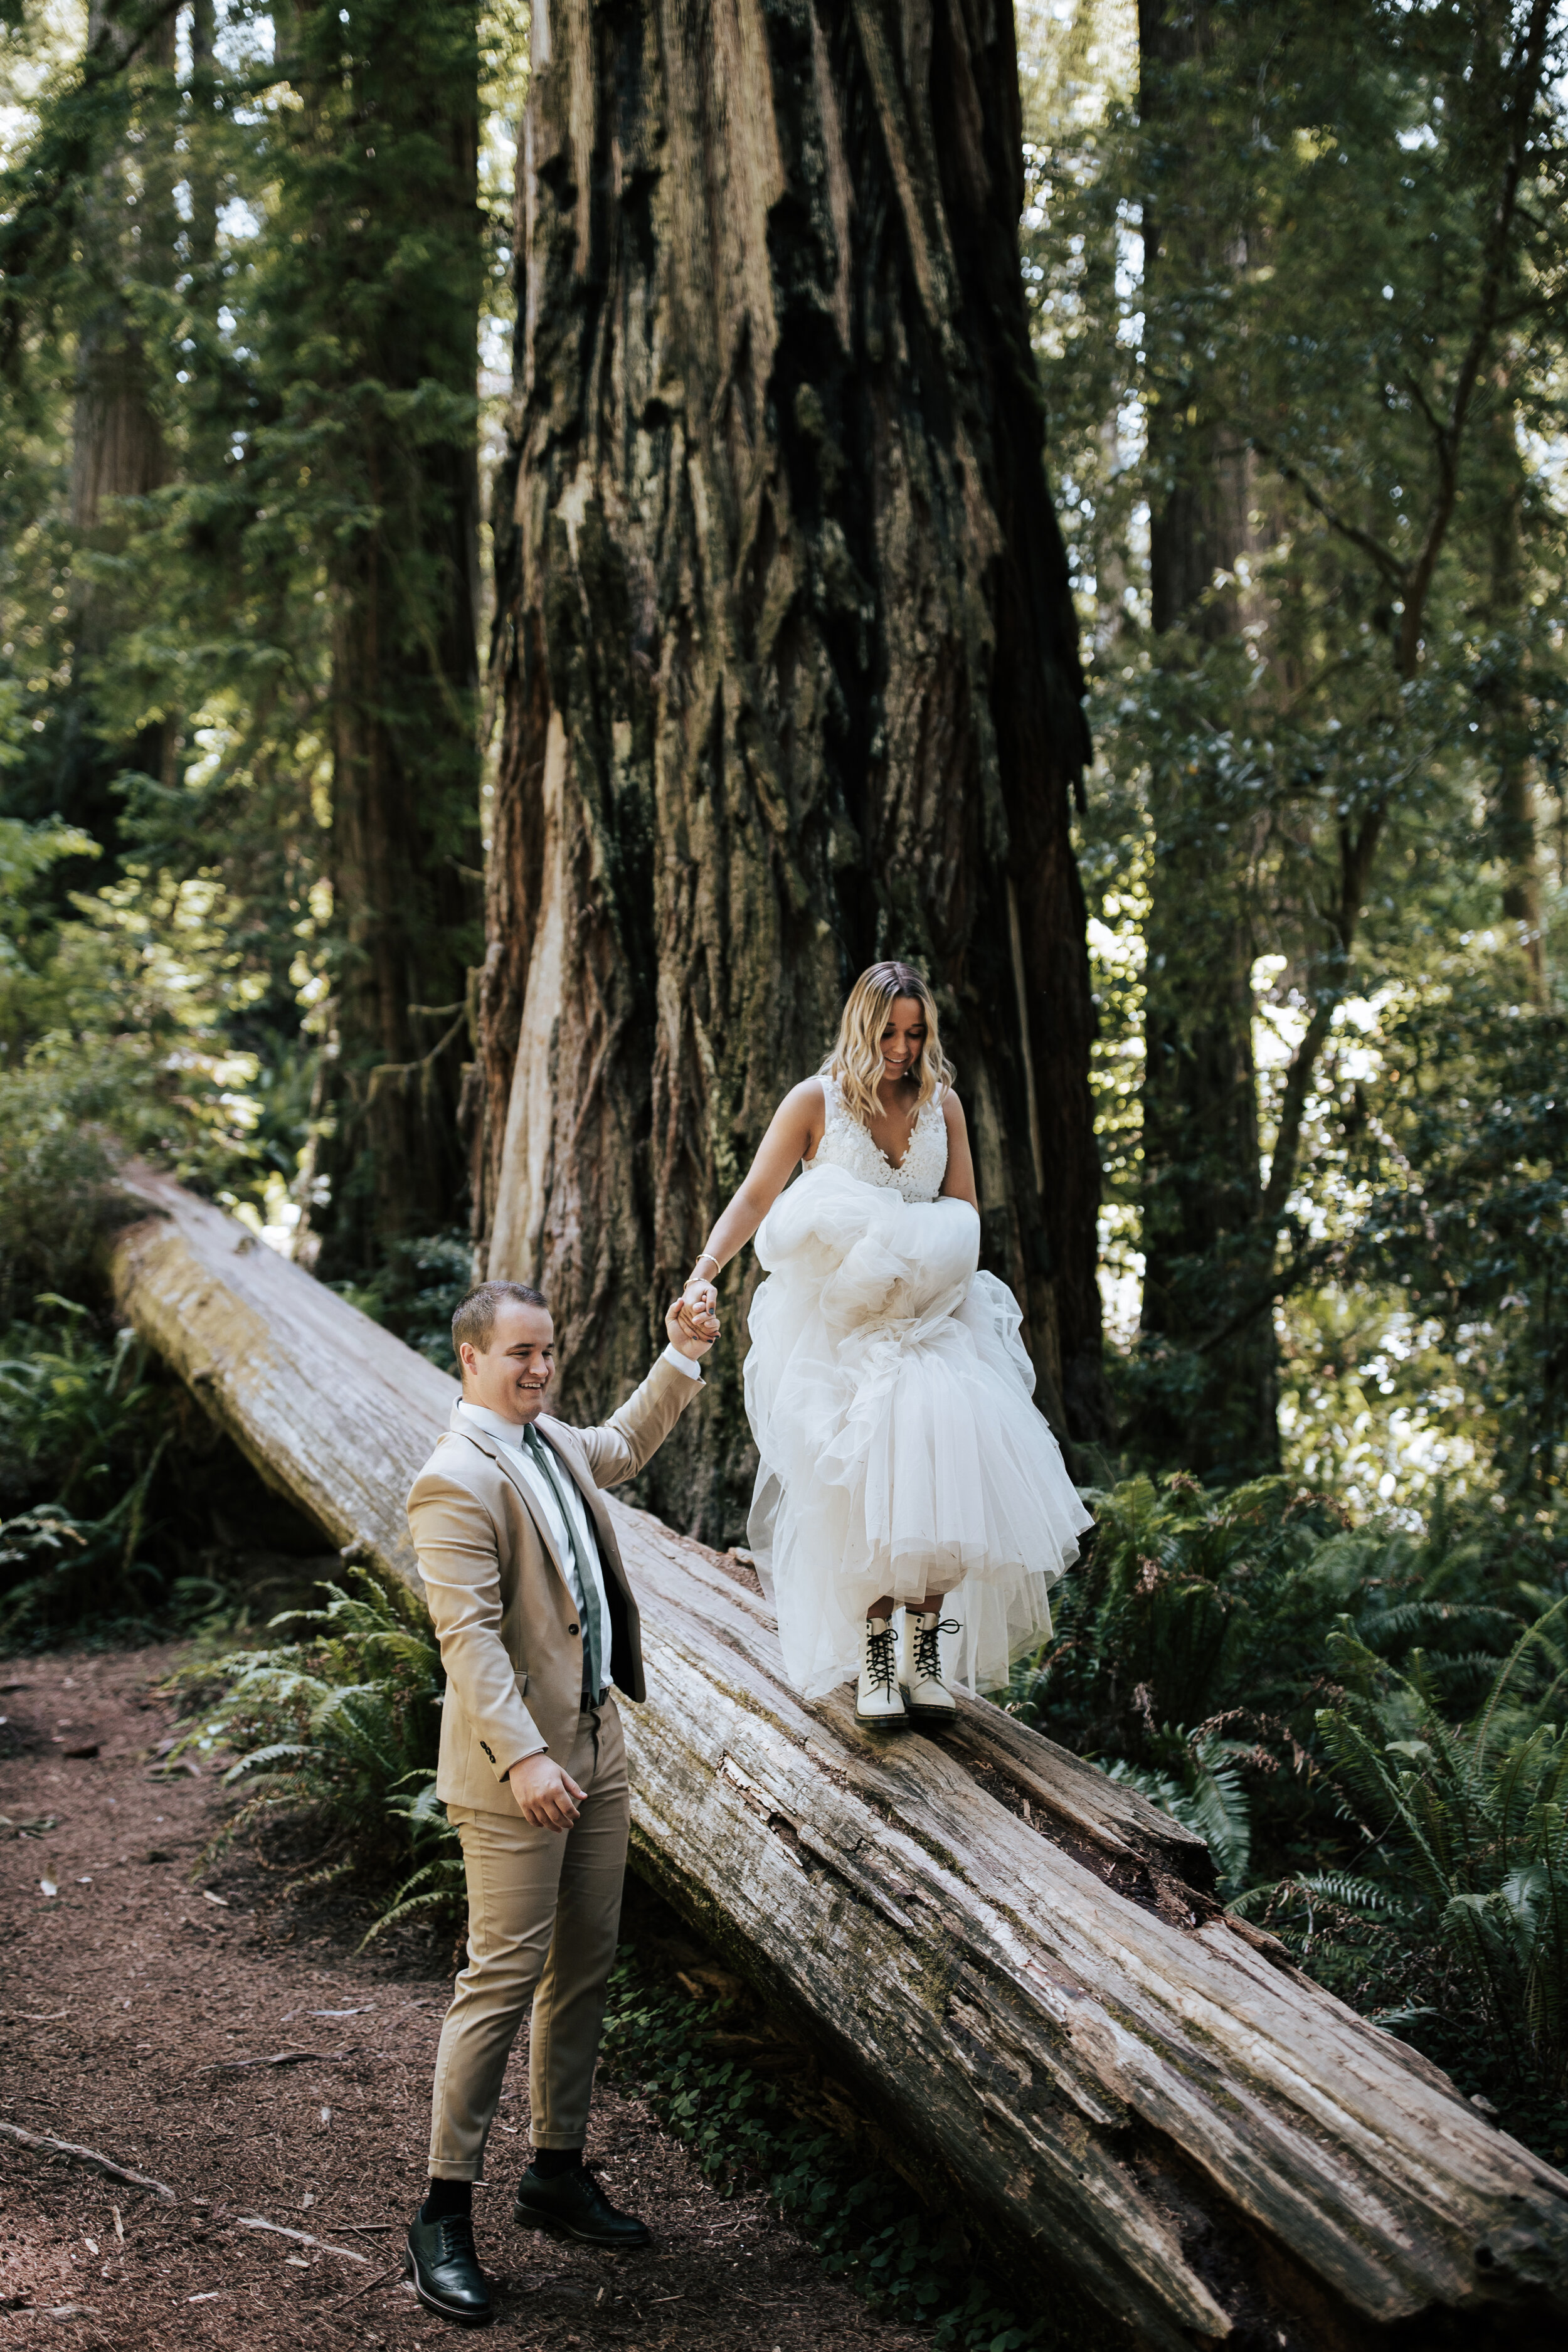  In the Northern California Mountains Emily Jenkins Photography captures a groom helping his bride walk on a large tree during an elopement. northern California elopement redwood elopement photography wedding boots #emilyjenkinsphotography #emilyjenk